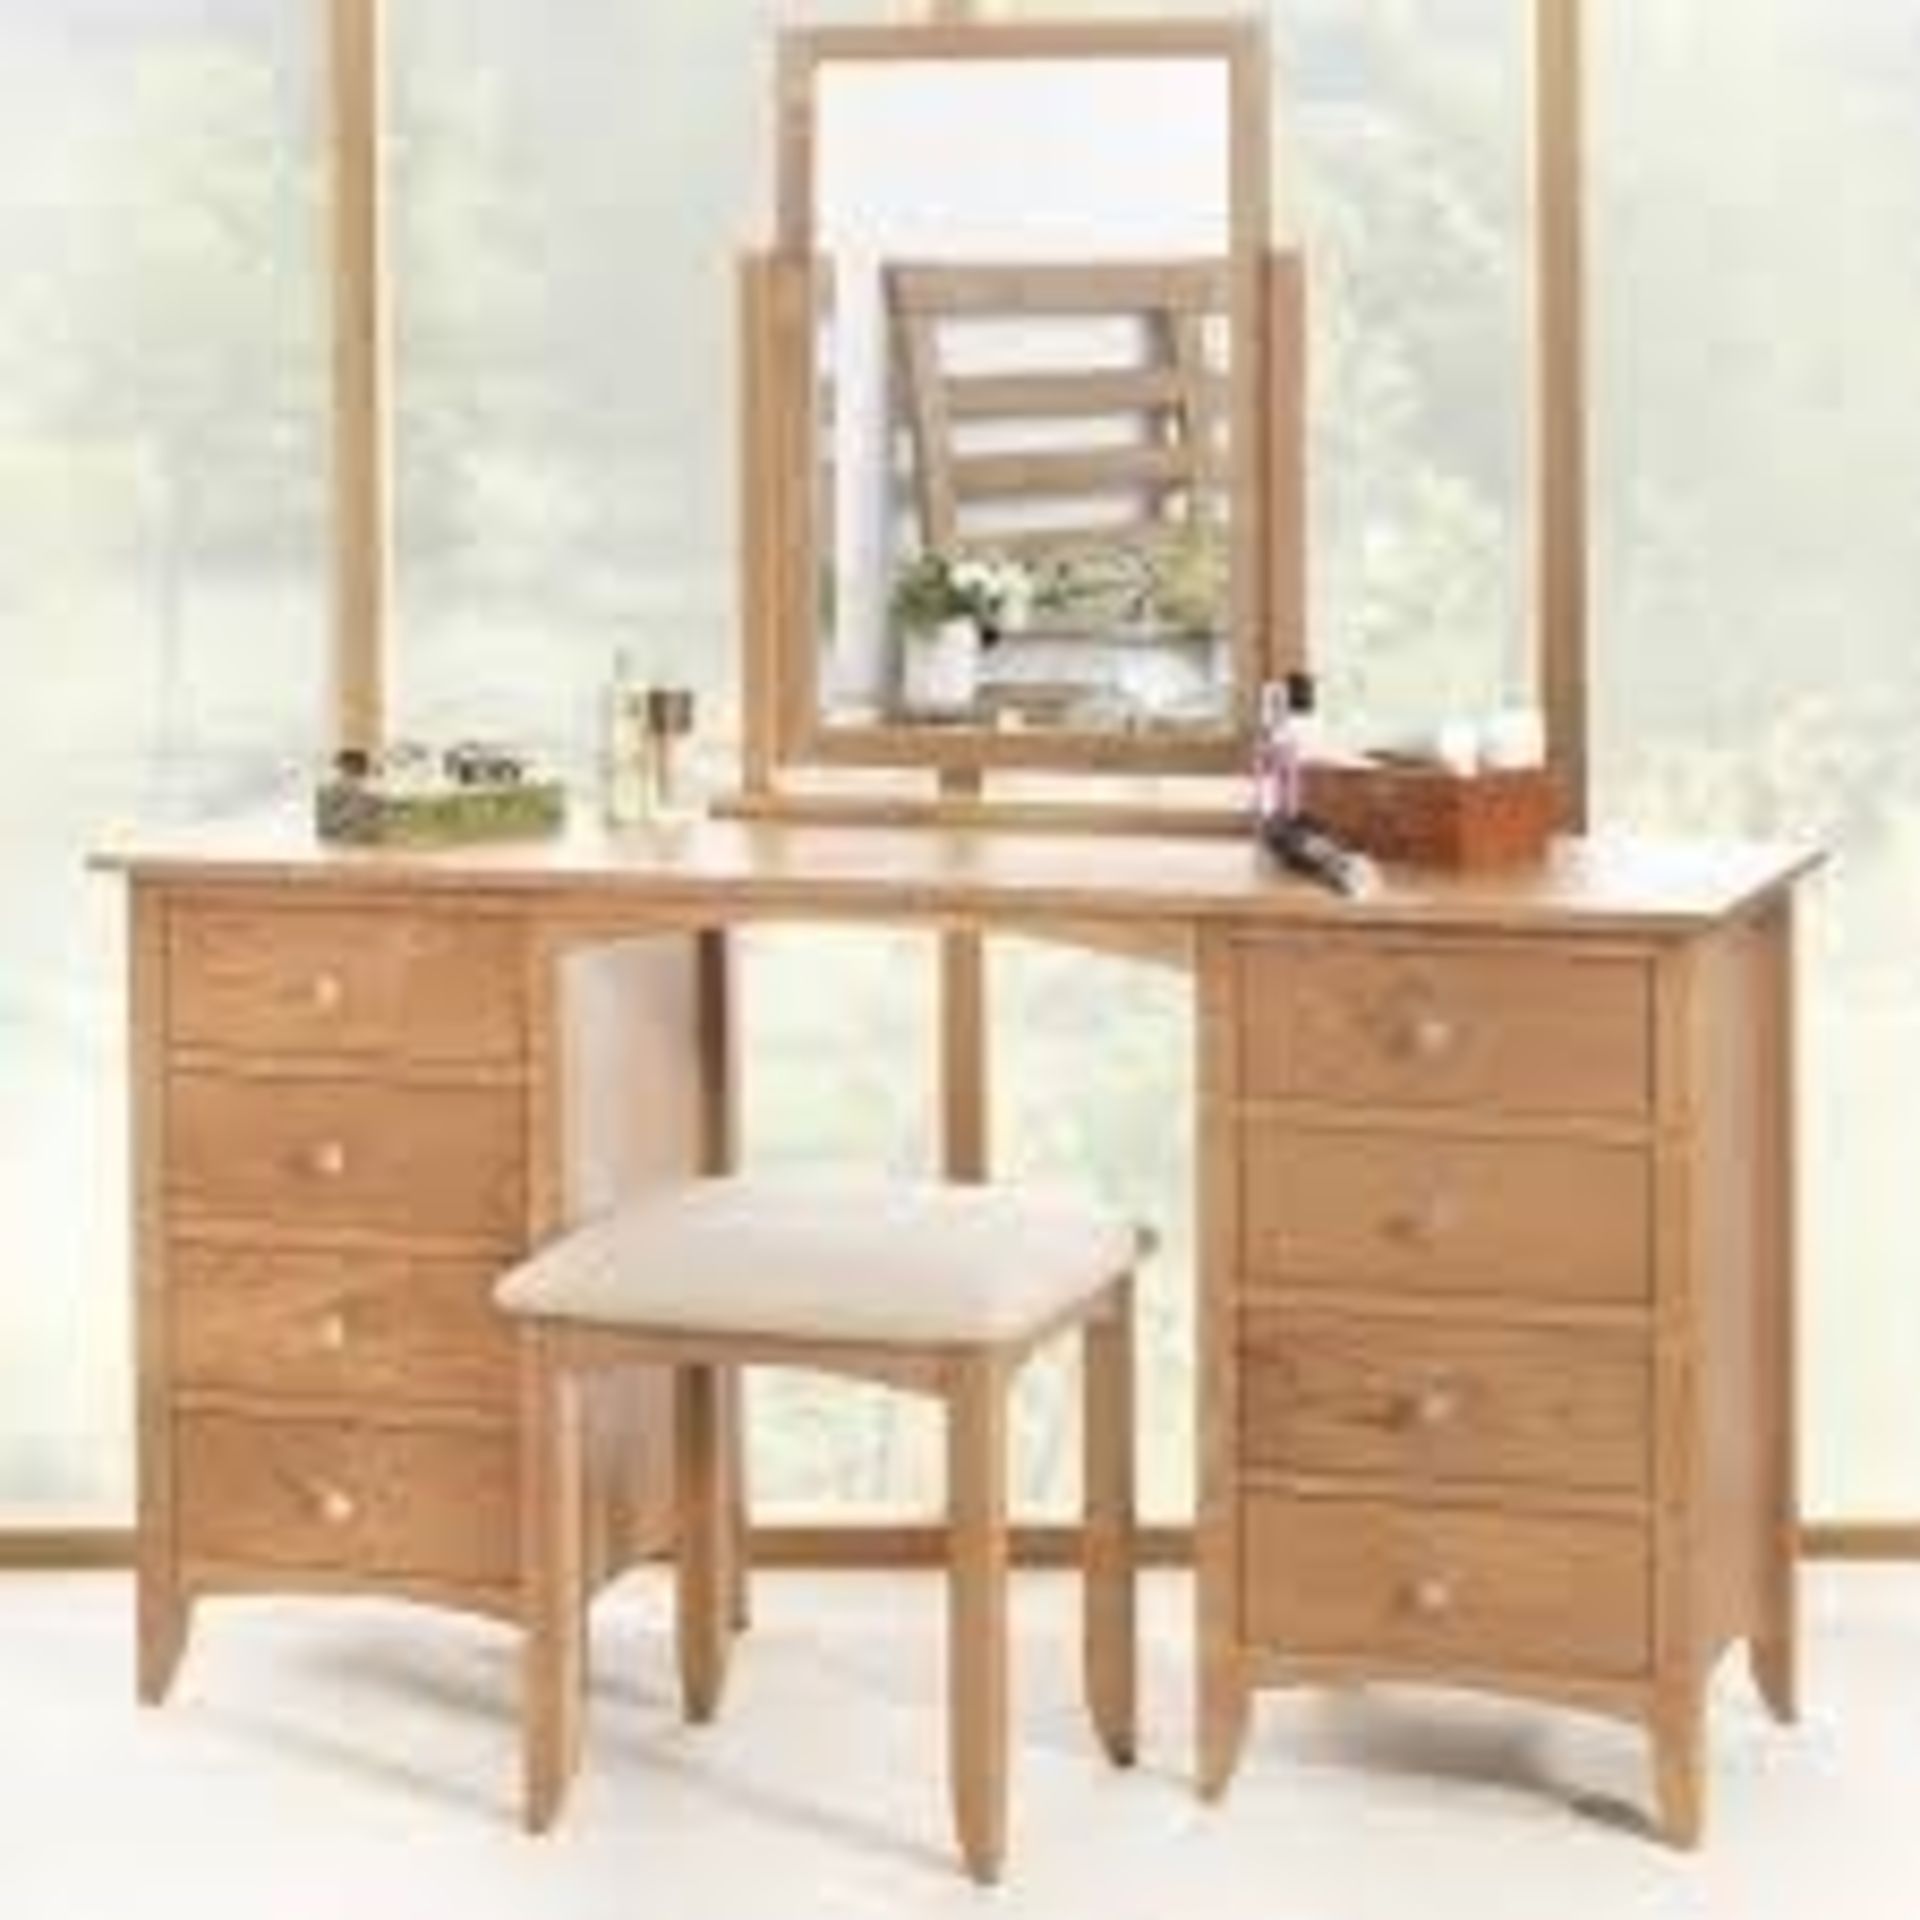 Boxed 8 Drawer Antique Pine Wooden Double Dressing Table RRP £400 Appraisals Available Upon Request)